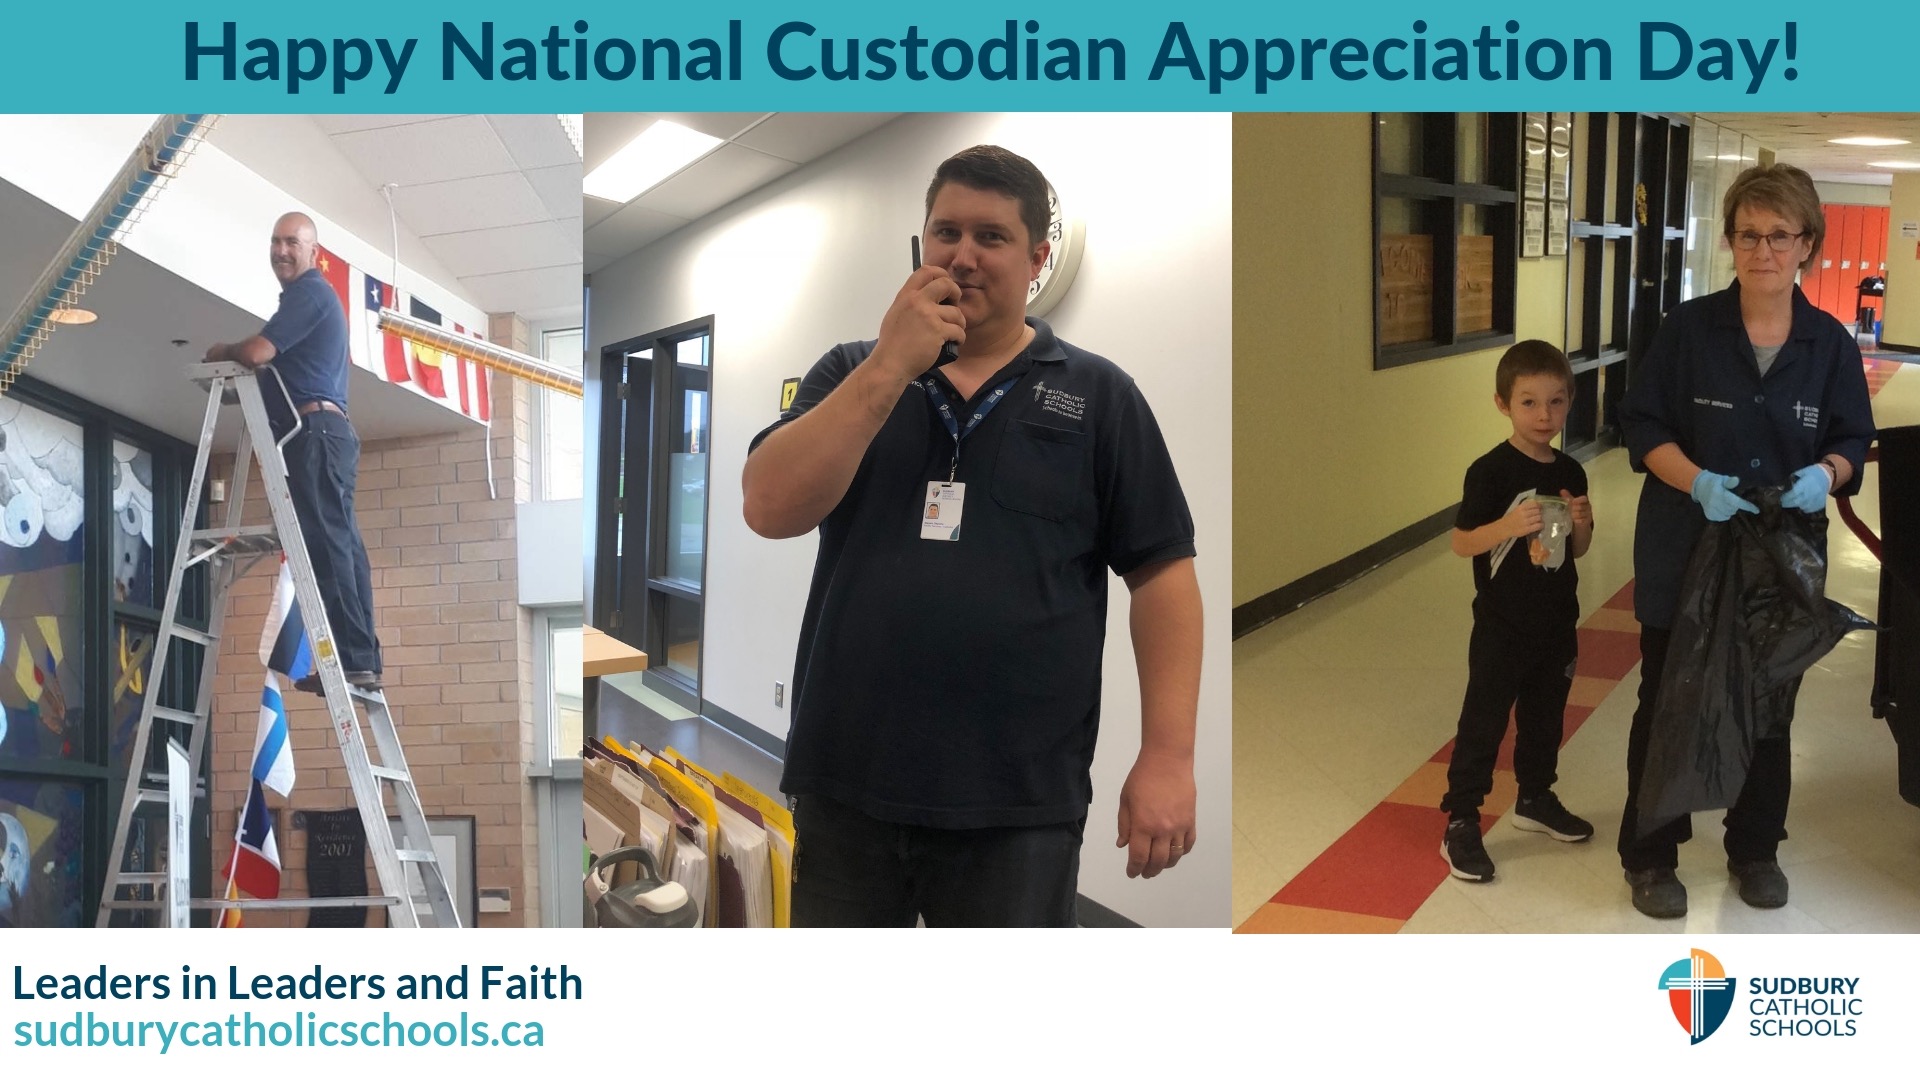 A collage of three different custodians working in their shcool communities.